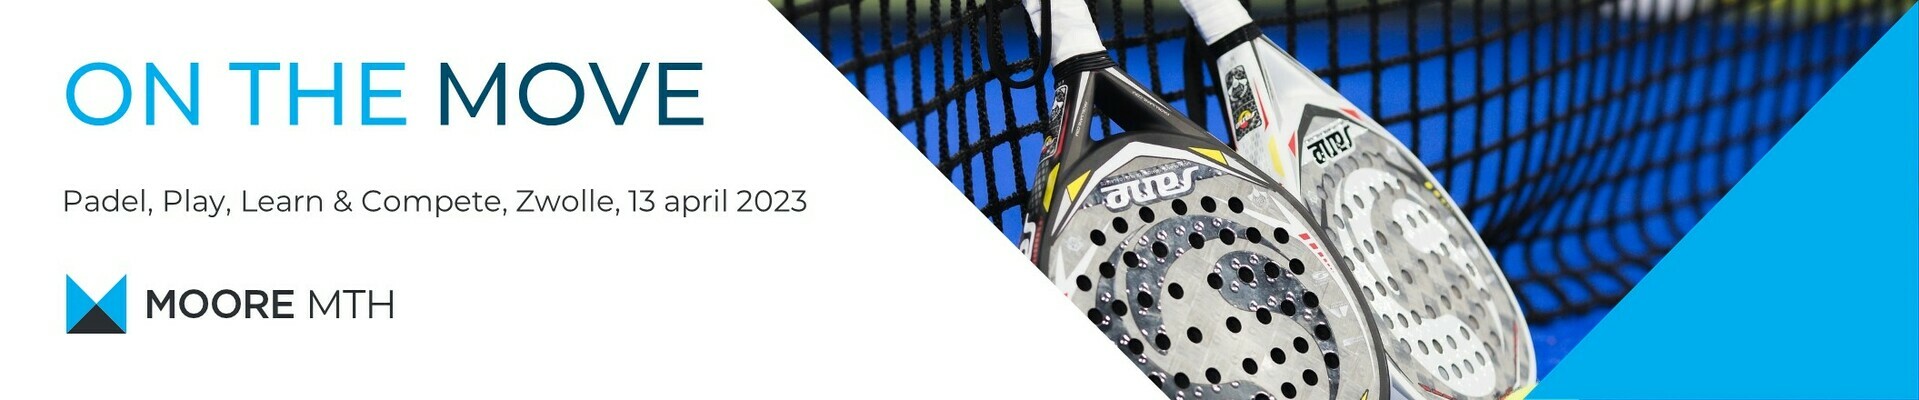 Padel - Play, Learn & Compete